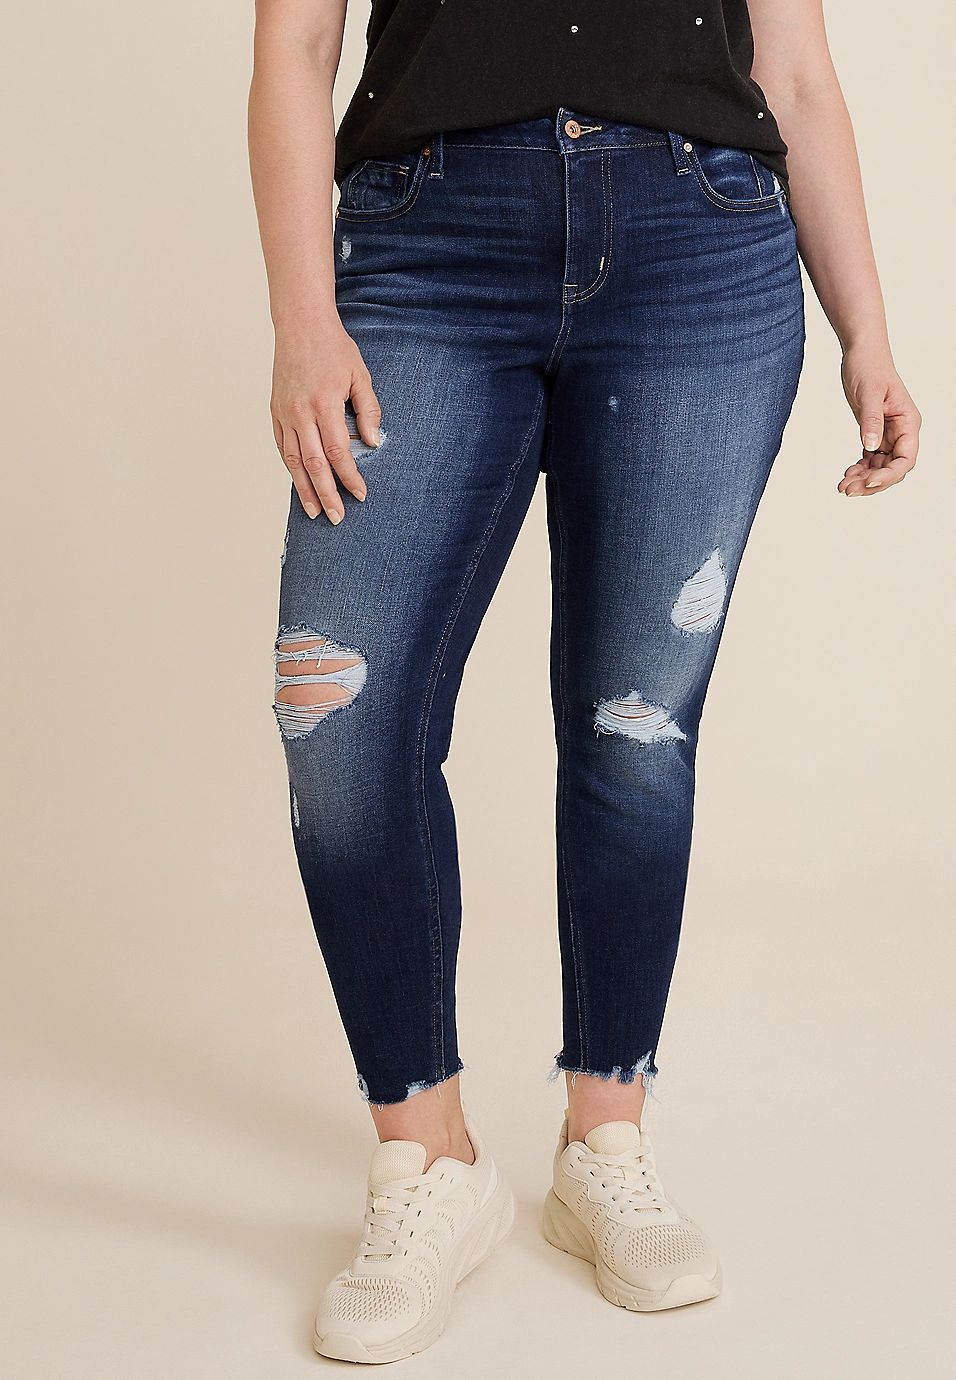 Plus Size edgely™ Curvy High Rise Ripped Super Skinny Ankle Jean | Maurices